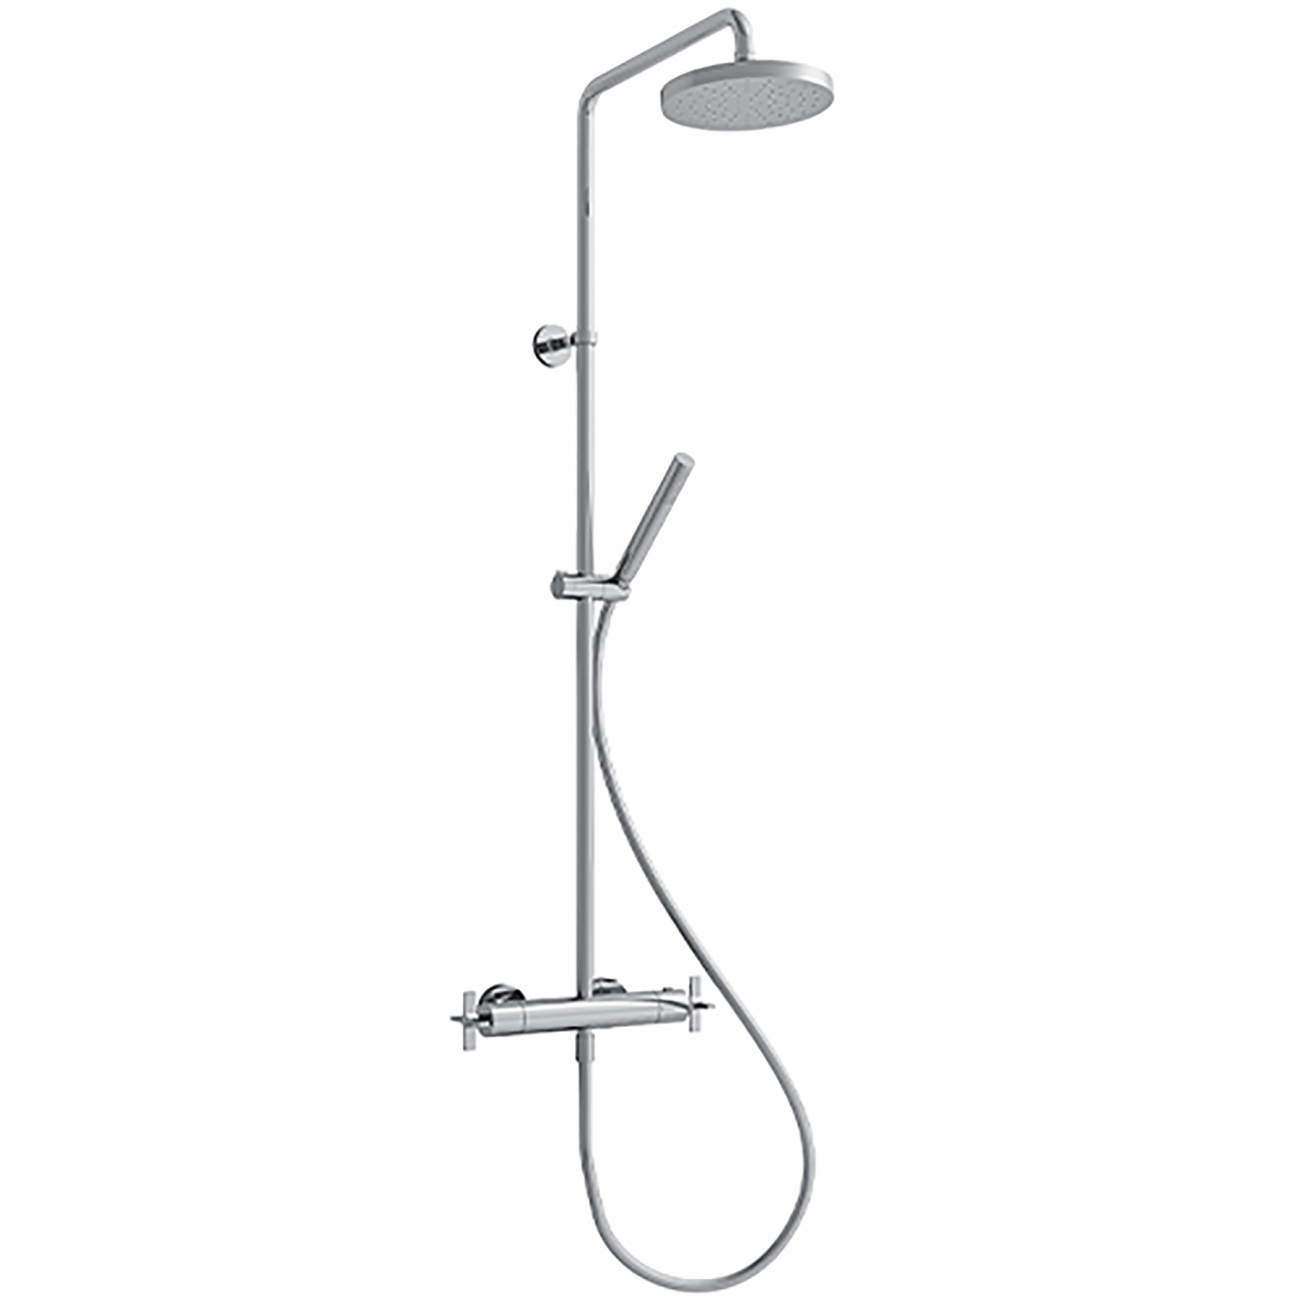 Cristina Contemporary Lines Cross Road Wall Mounted Shower Thermostatic Mixer